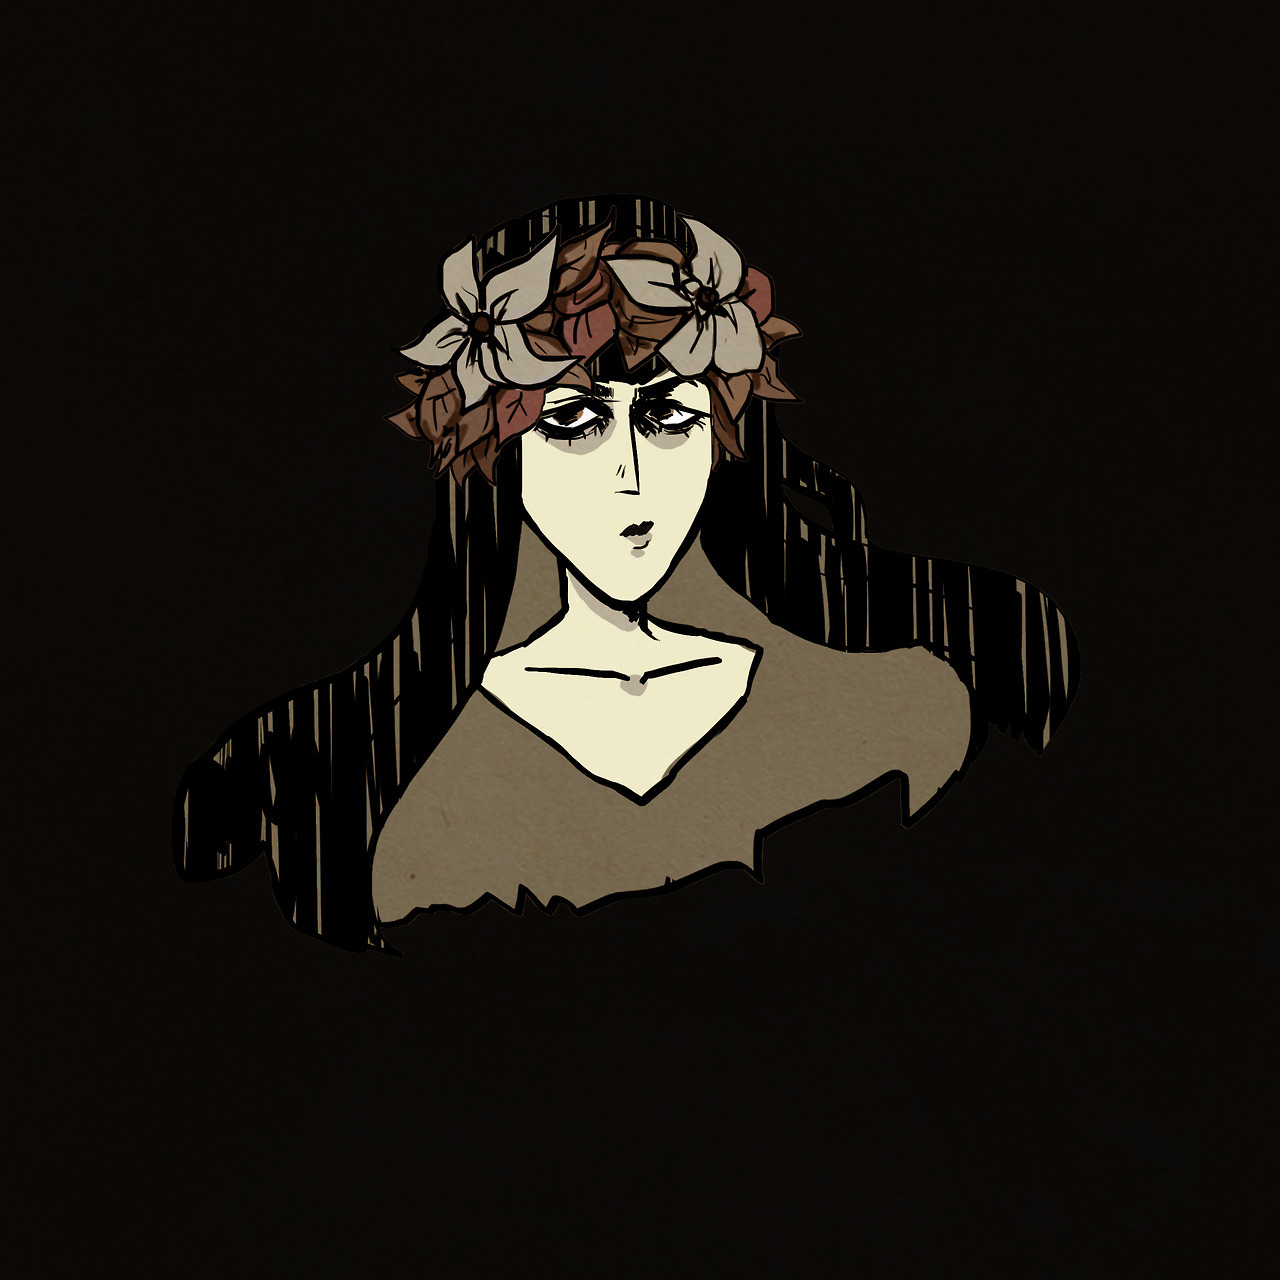 Still in love with the Don’t Starve art stylePatreon